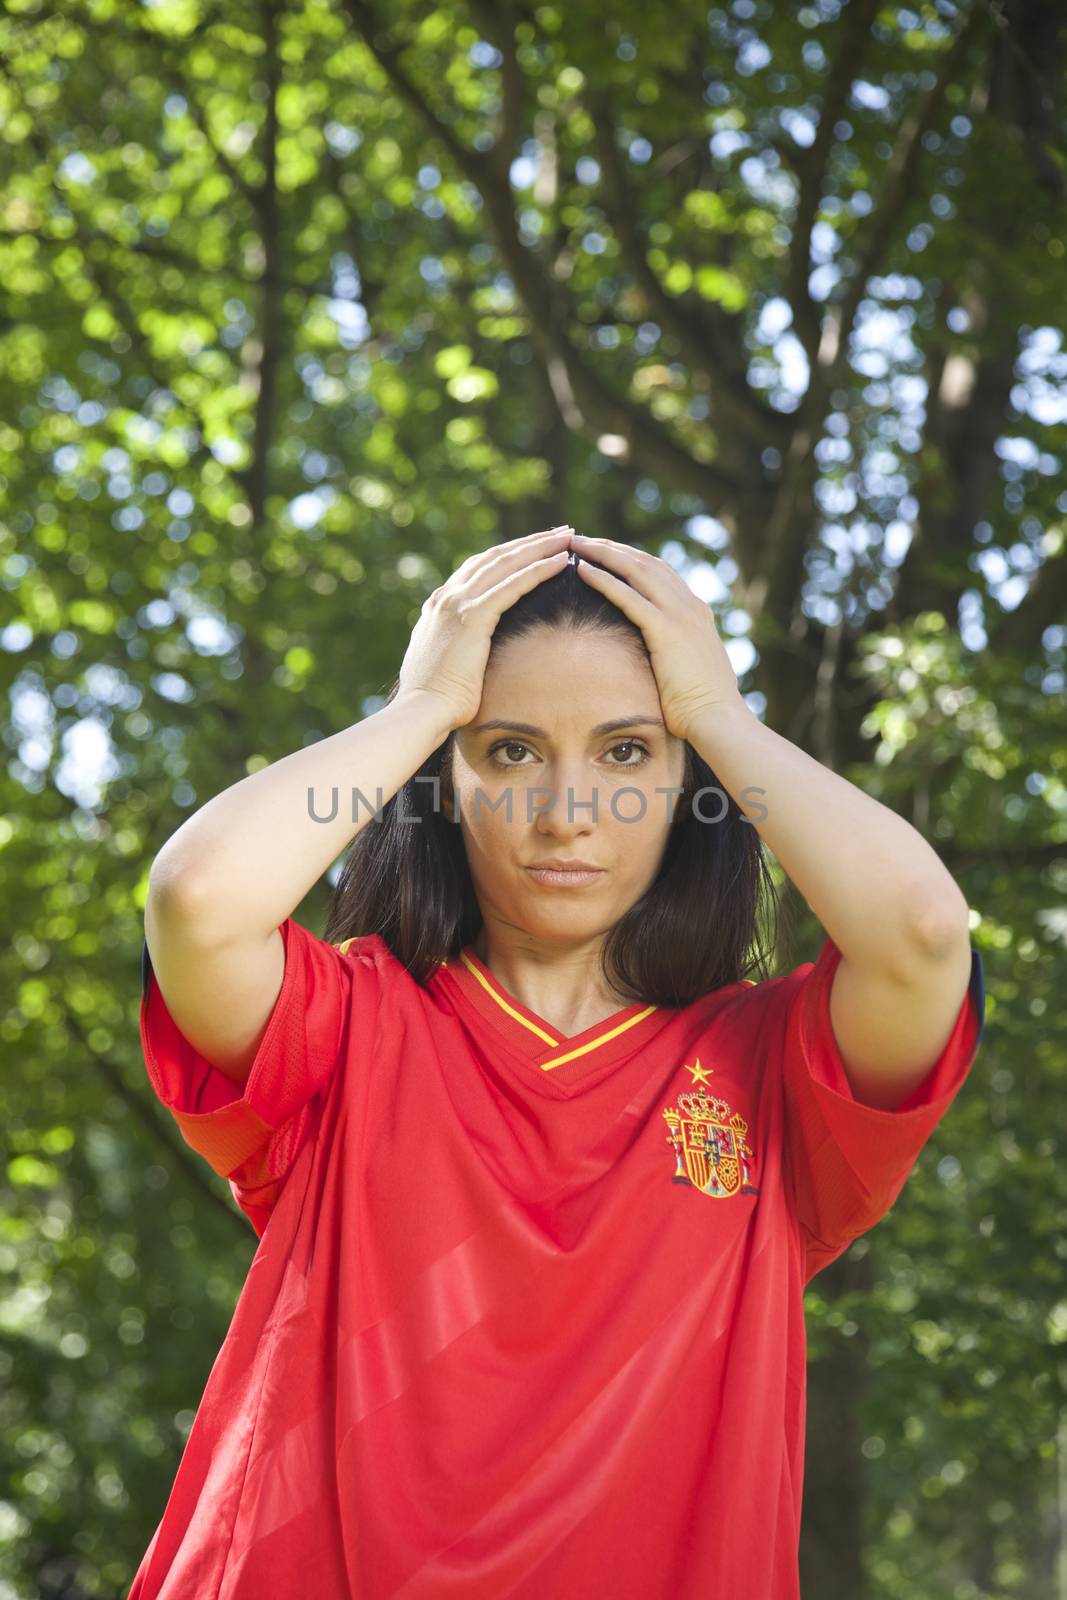 loser spanish football supporter by quintanilla